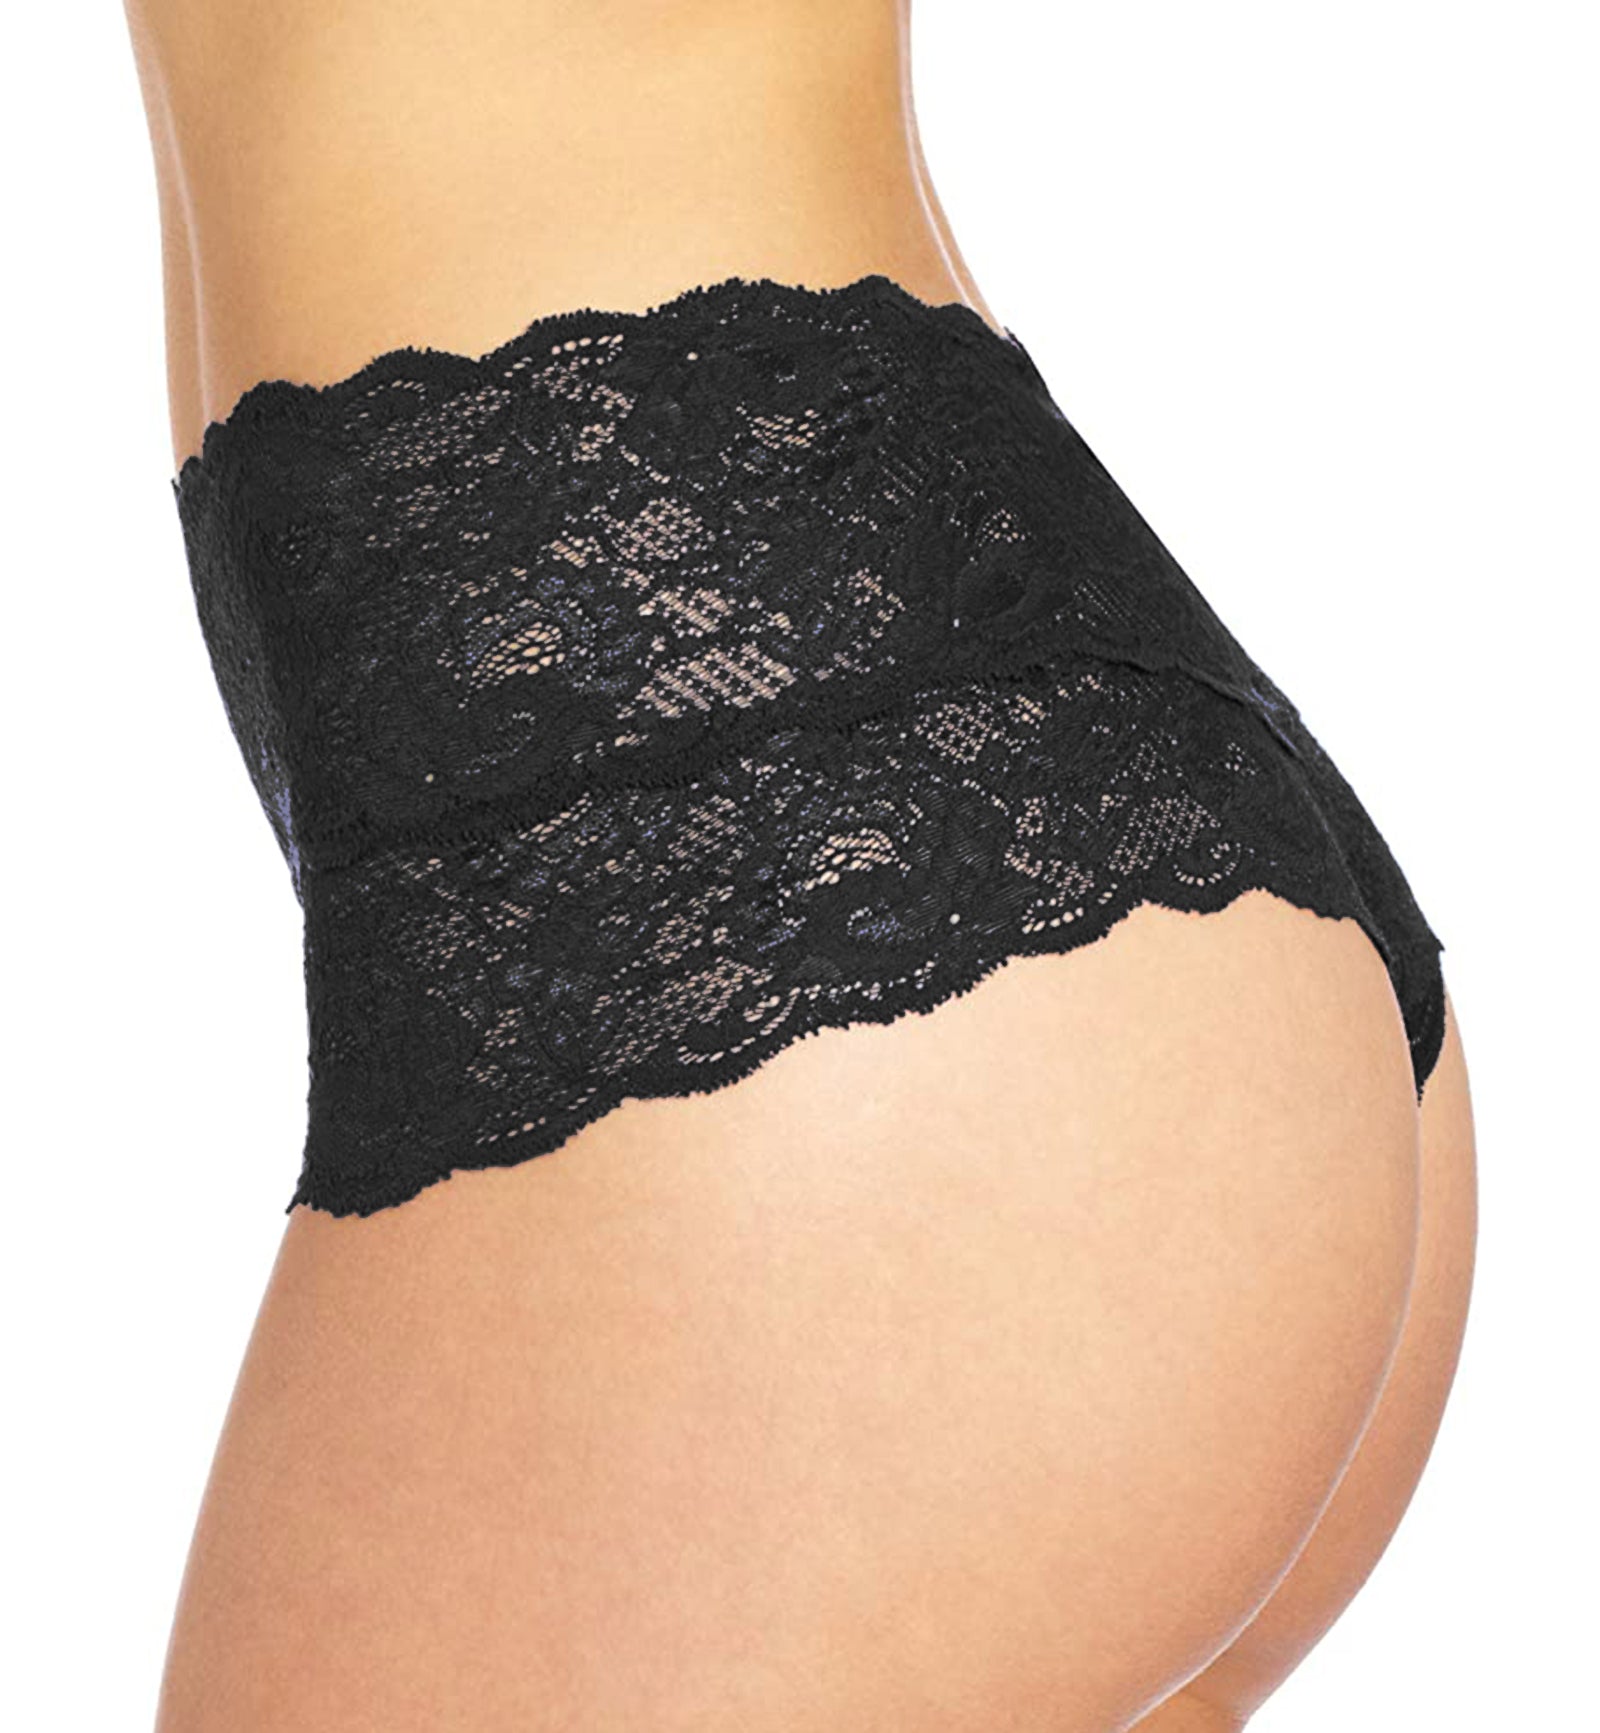 Cosabella Never Say Never High Rise Thong (NEVER0361),Small/Medium,Black - Black,S/M